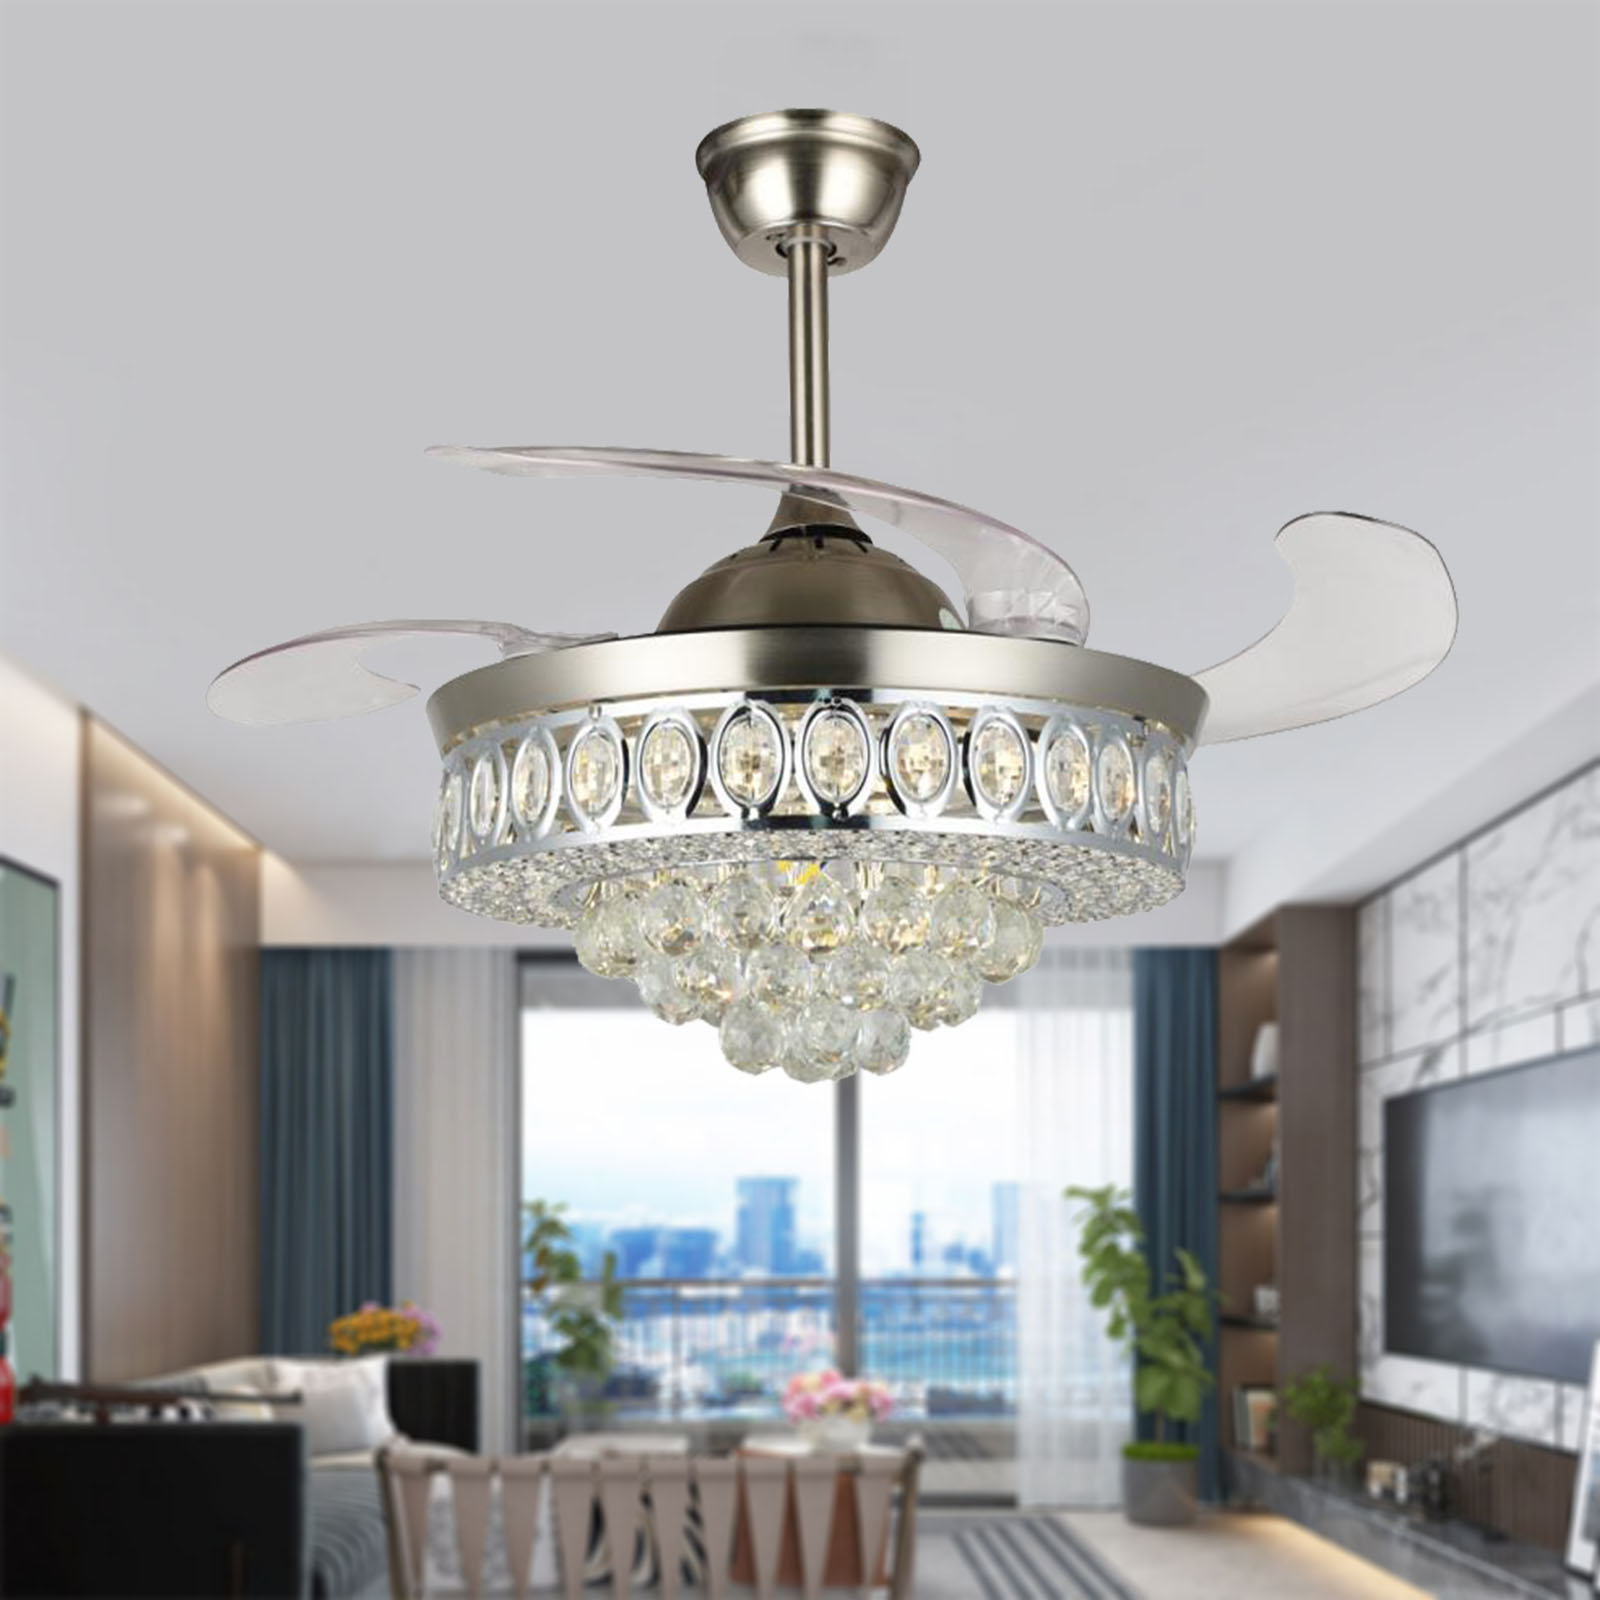 42" Chrome Silver Remote Invisible Ceiling Fan Lamp Crystal LED Chandelier Light 